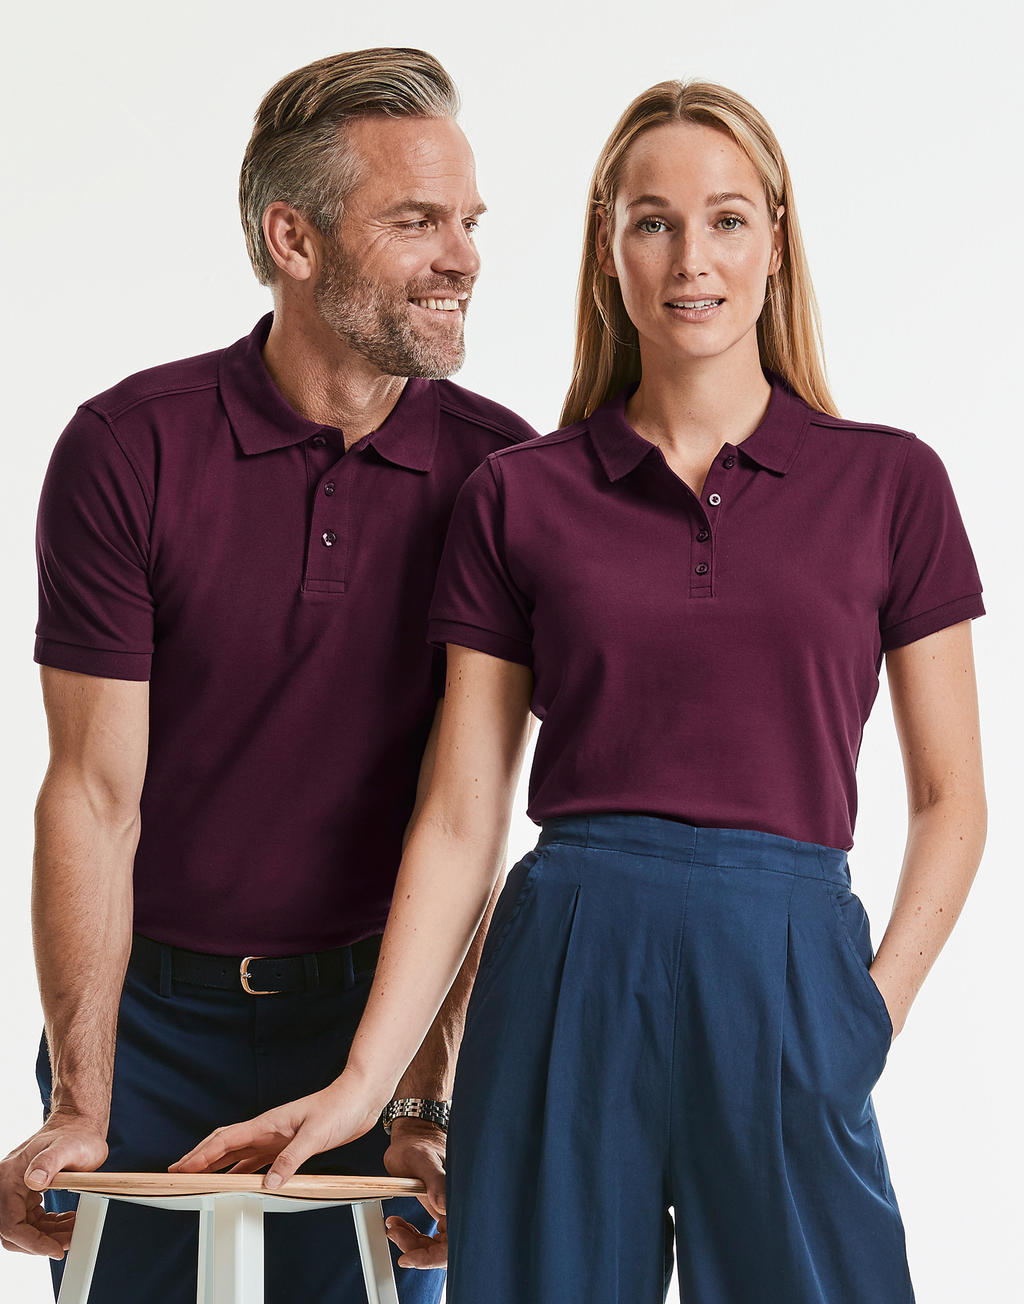  Ladies Tailored Stretch Polo in Farbe White